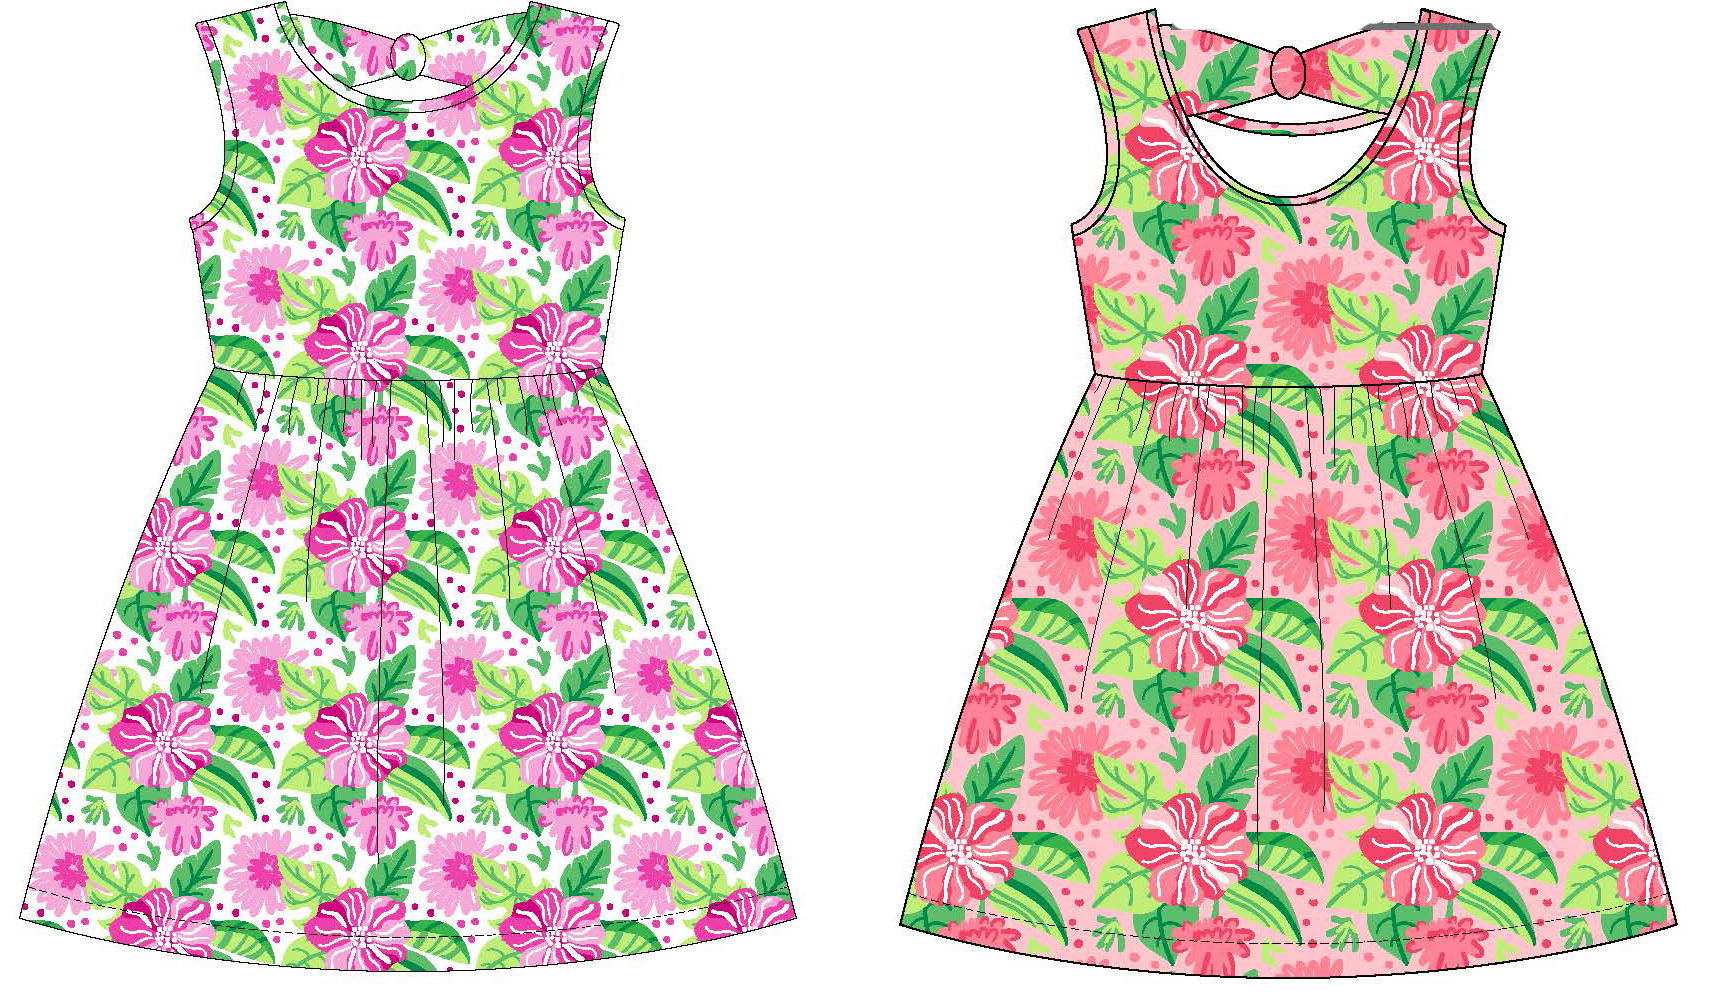 Baby Girl's Printed Knit Sleeveless Dress w/ UNDERWEAR Panty - Tropical Floral Print - Sizes 12M-24M